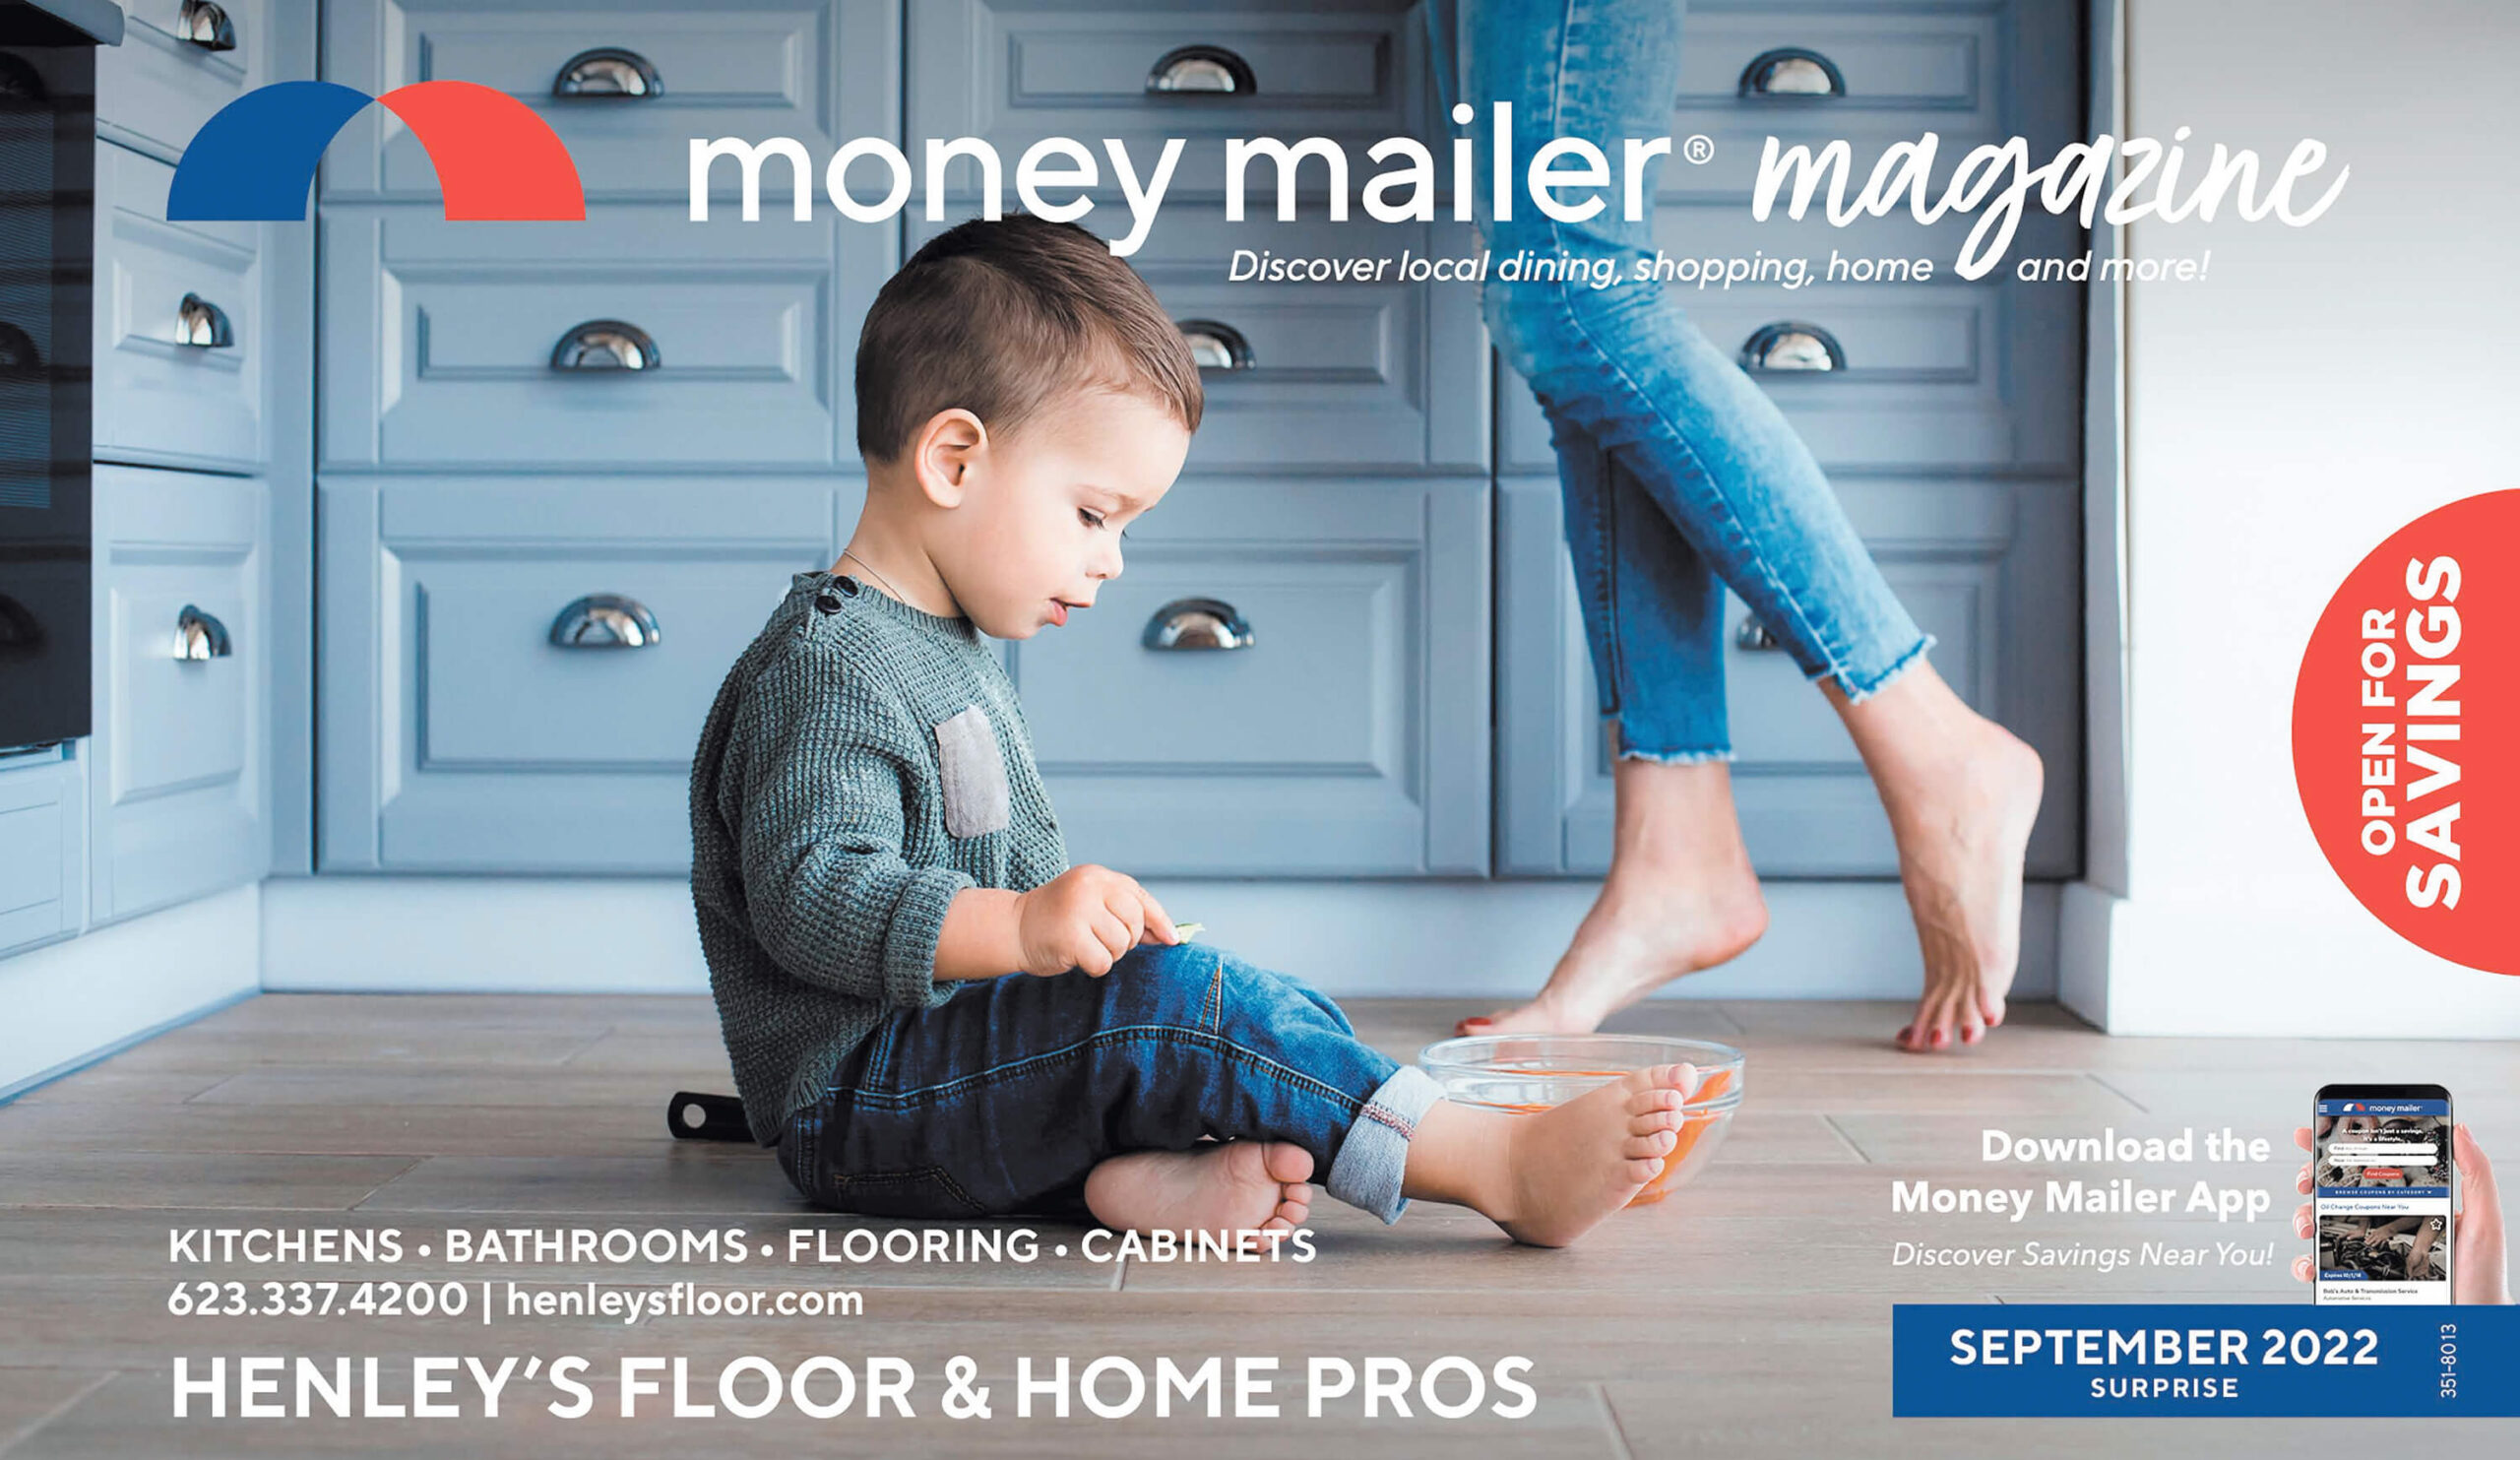 Money Mailer Magazine | Discover local dining, shopping, home and more!